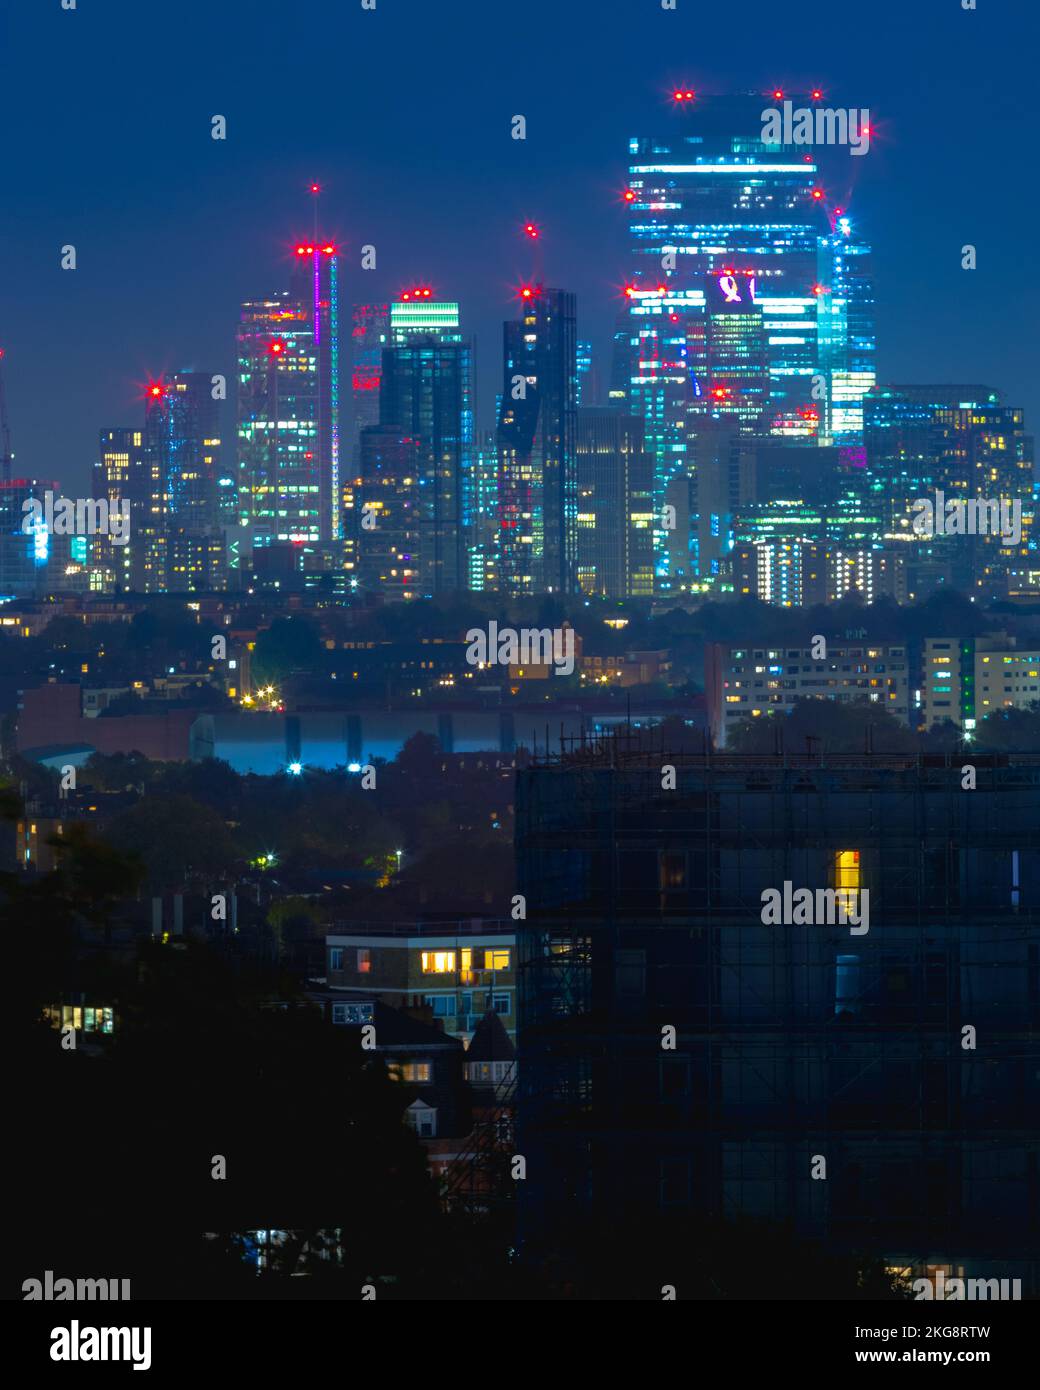 A view of the London skyline taken at night with light trails, showing a range of important and famous buidings against the back drop of a blue night Stock Photo